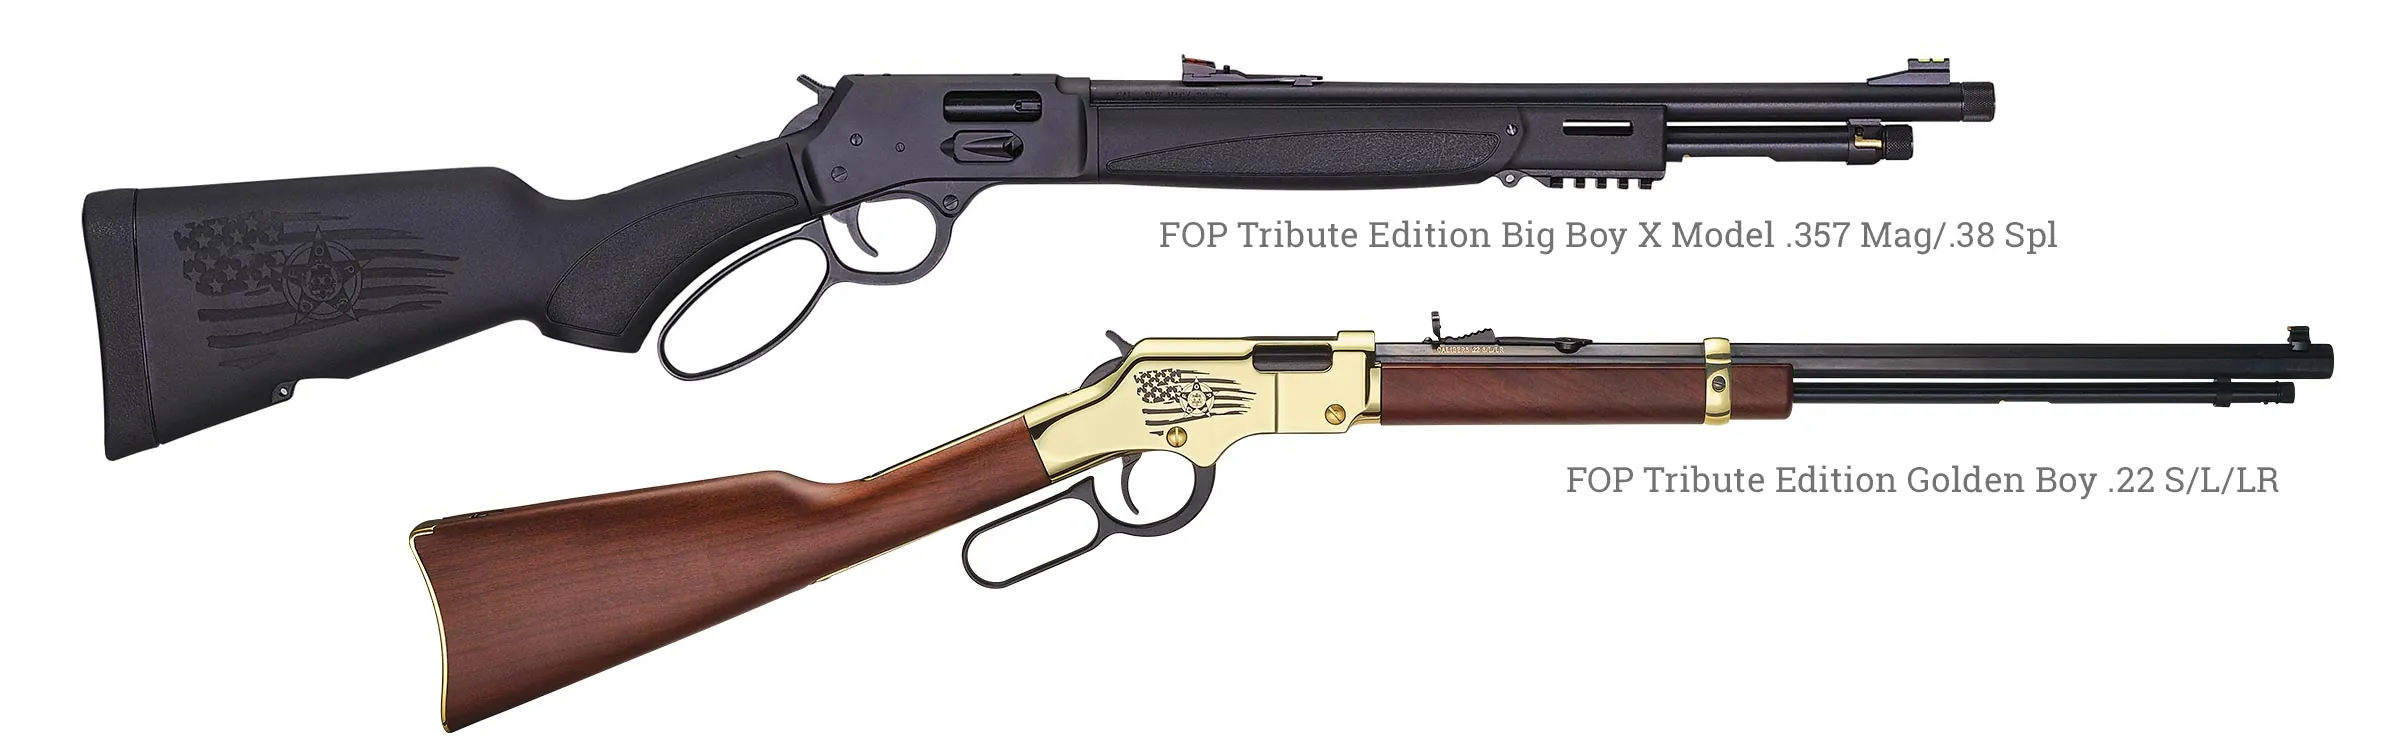 Henry FOP Tribute Edition Rifles